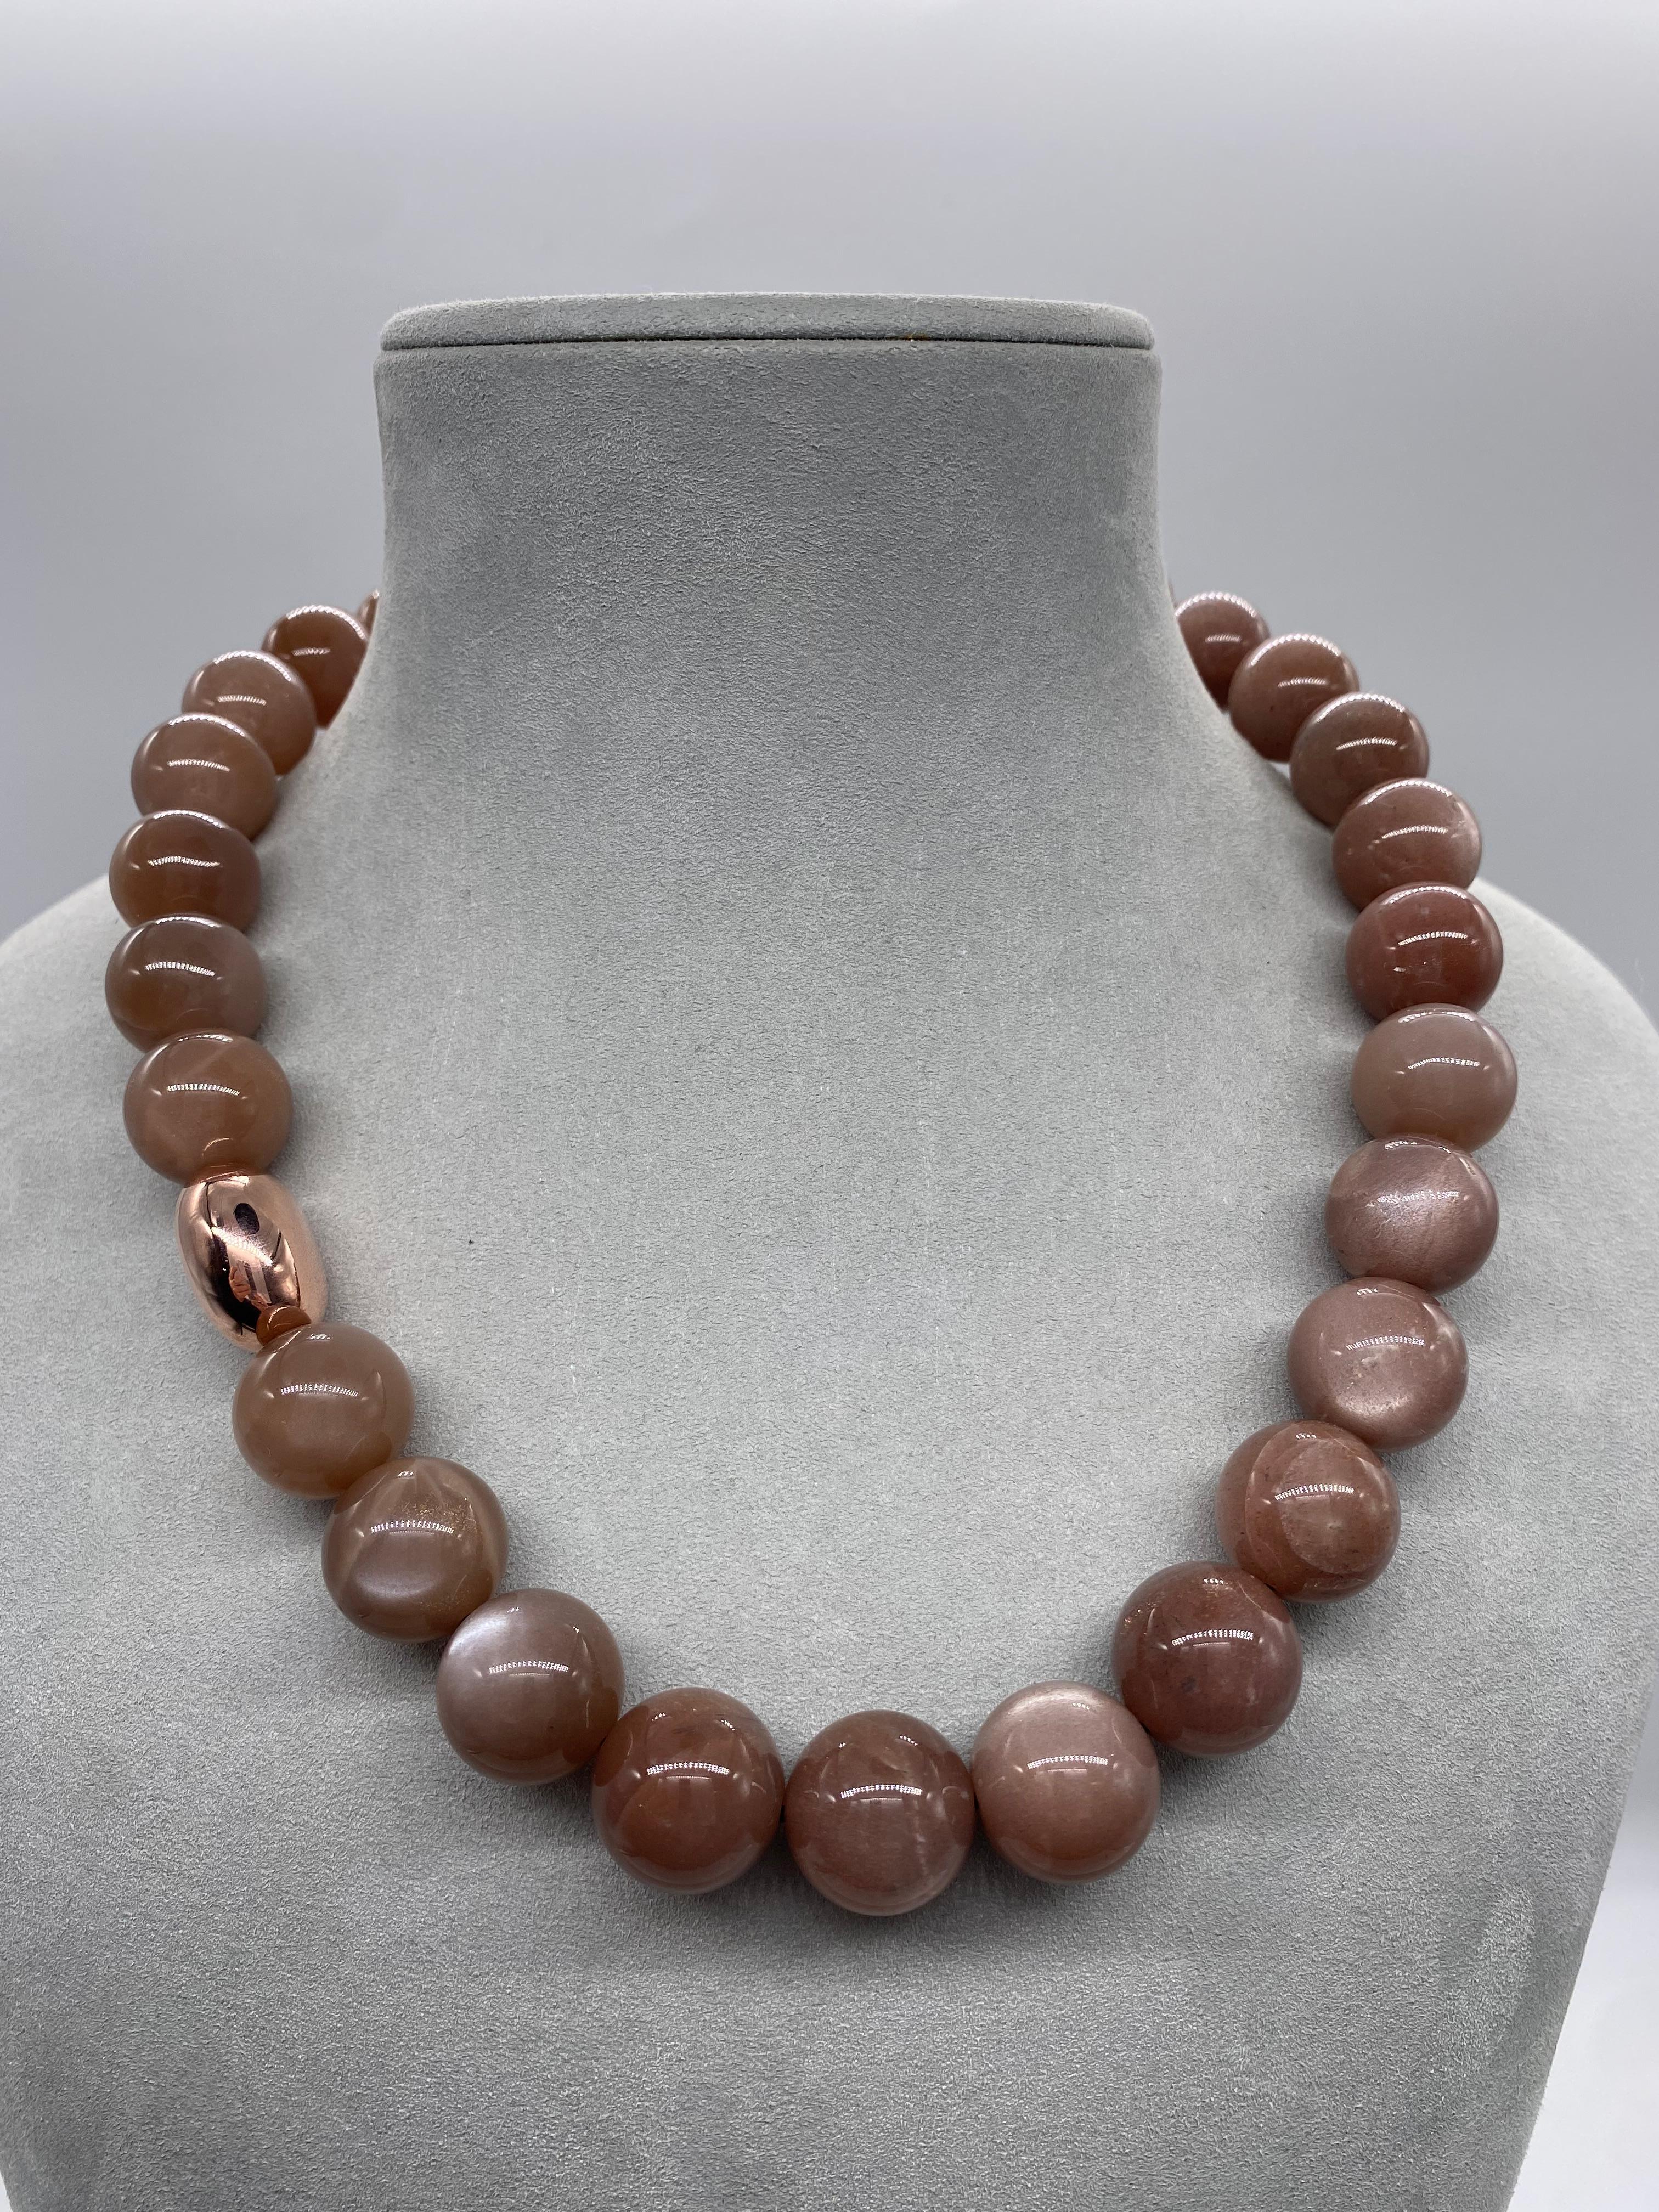 Artisan Beaded Necklaces with Peach Moonstone, Gold and Bakelite For Sale